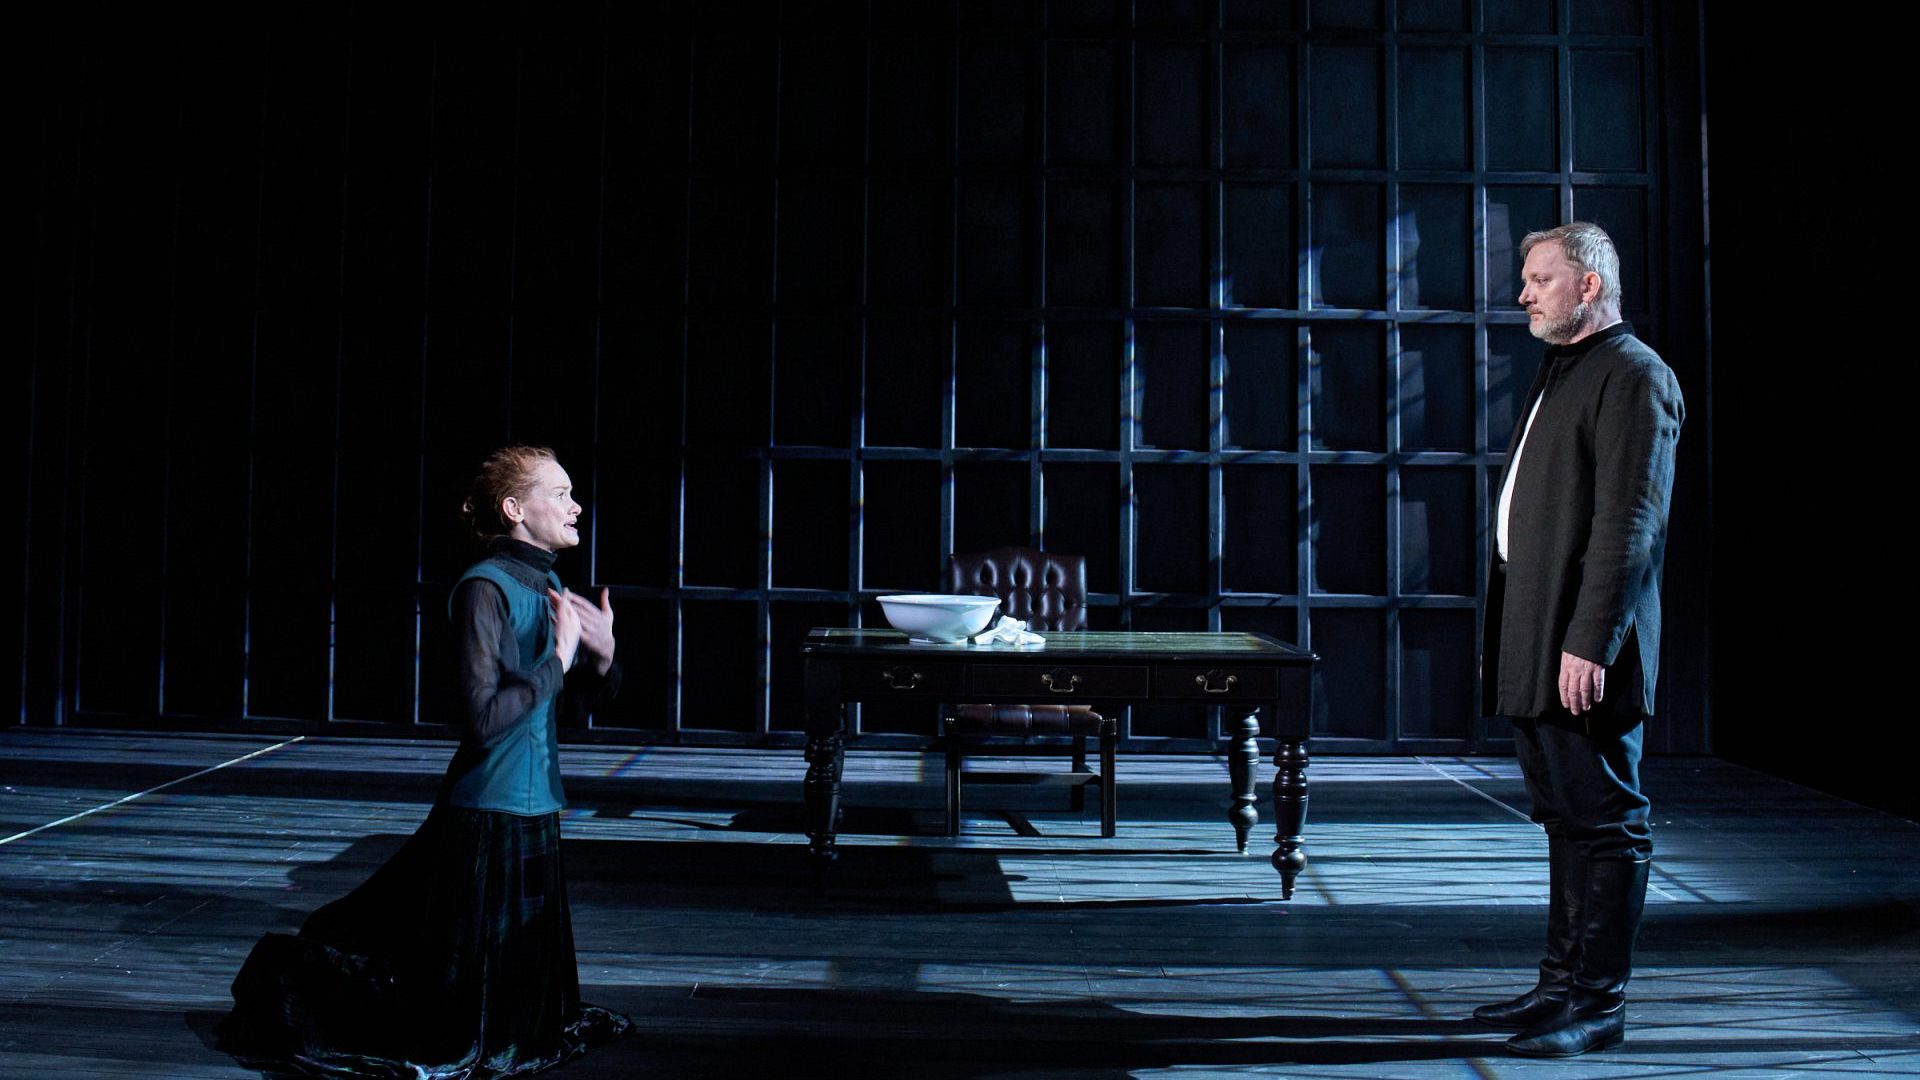 Rona Morison (Agnes) and Douglas Henshall (James Melville) in Mary at Hampstead theatre. Photo: Manuel Harlan